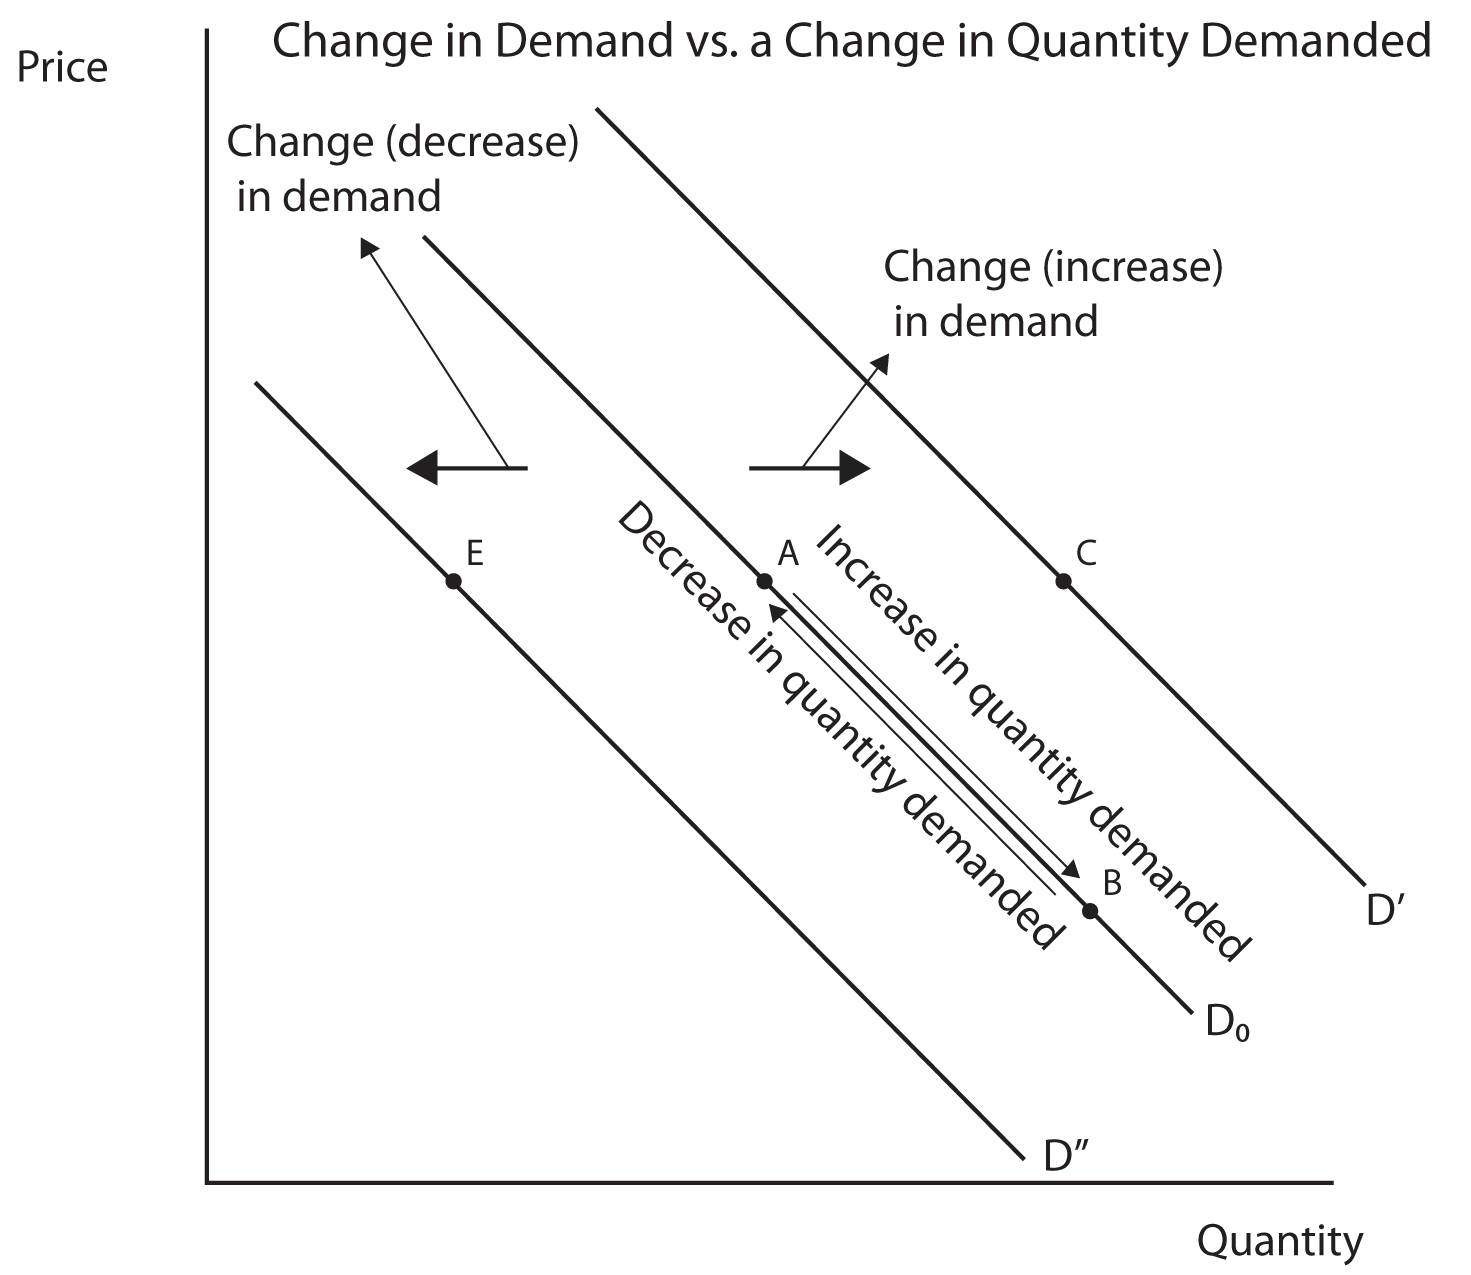 Description: Description: Image 1.08: Change in Demand vs. a Change in Quantity Demanded. This image shows a graph similar to the last, with Price on the Y axis and Quantity on the X axis.  A 45 degree line labeled D0 slopes downward from the Y axis to the X axis.  A parallel line to its right is labeled D Prime (representing an increase in demand) and a parallel line to its left is labeled D Prime Prime (representing a decrease in demand).  Two points (A and B, A having the higher Y value) are labeled on line D0 and are connected by arrows  going both directions.  The arrow from point A to B is labeled  Increase in quantity demanded  and the arrow from B to A is labeled  Decrease in quantity demanded. 